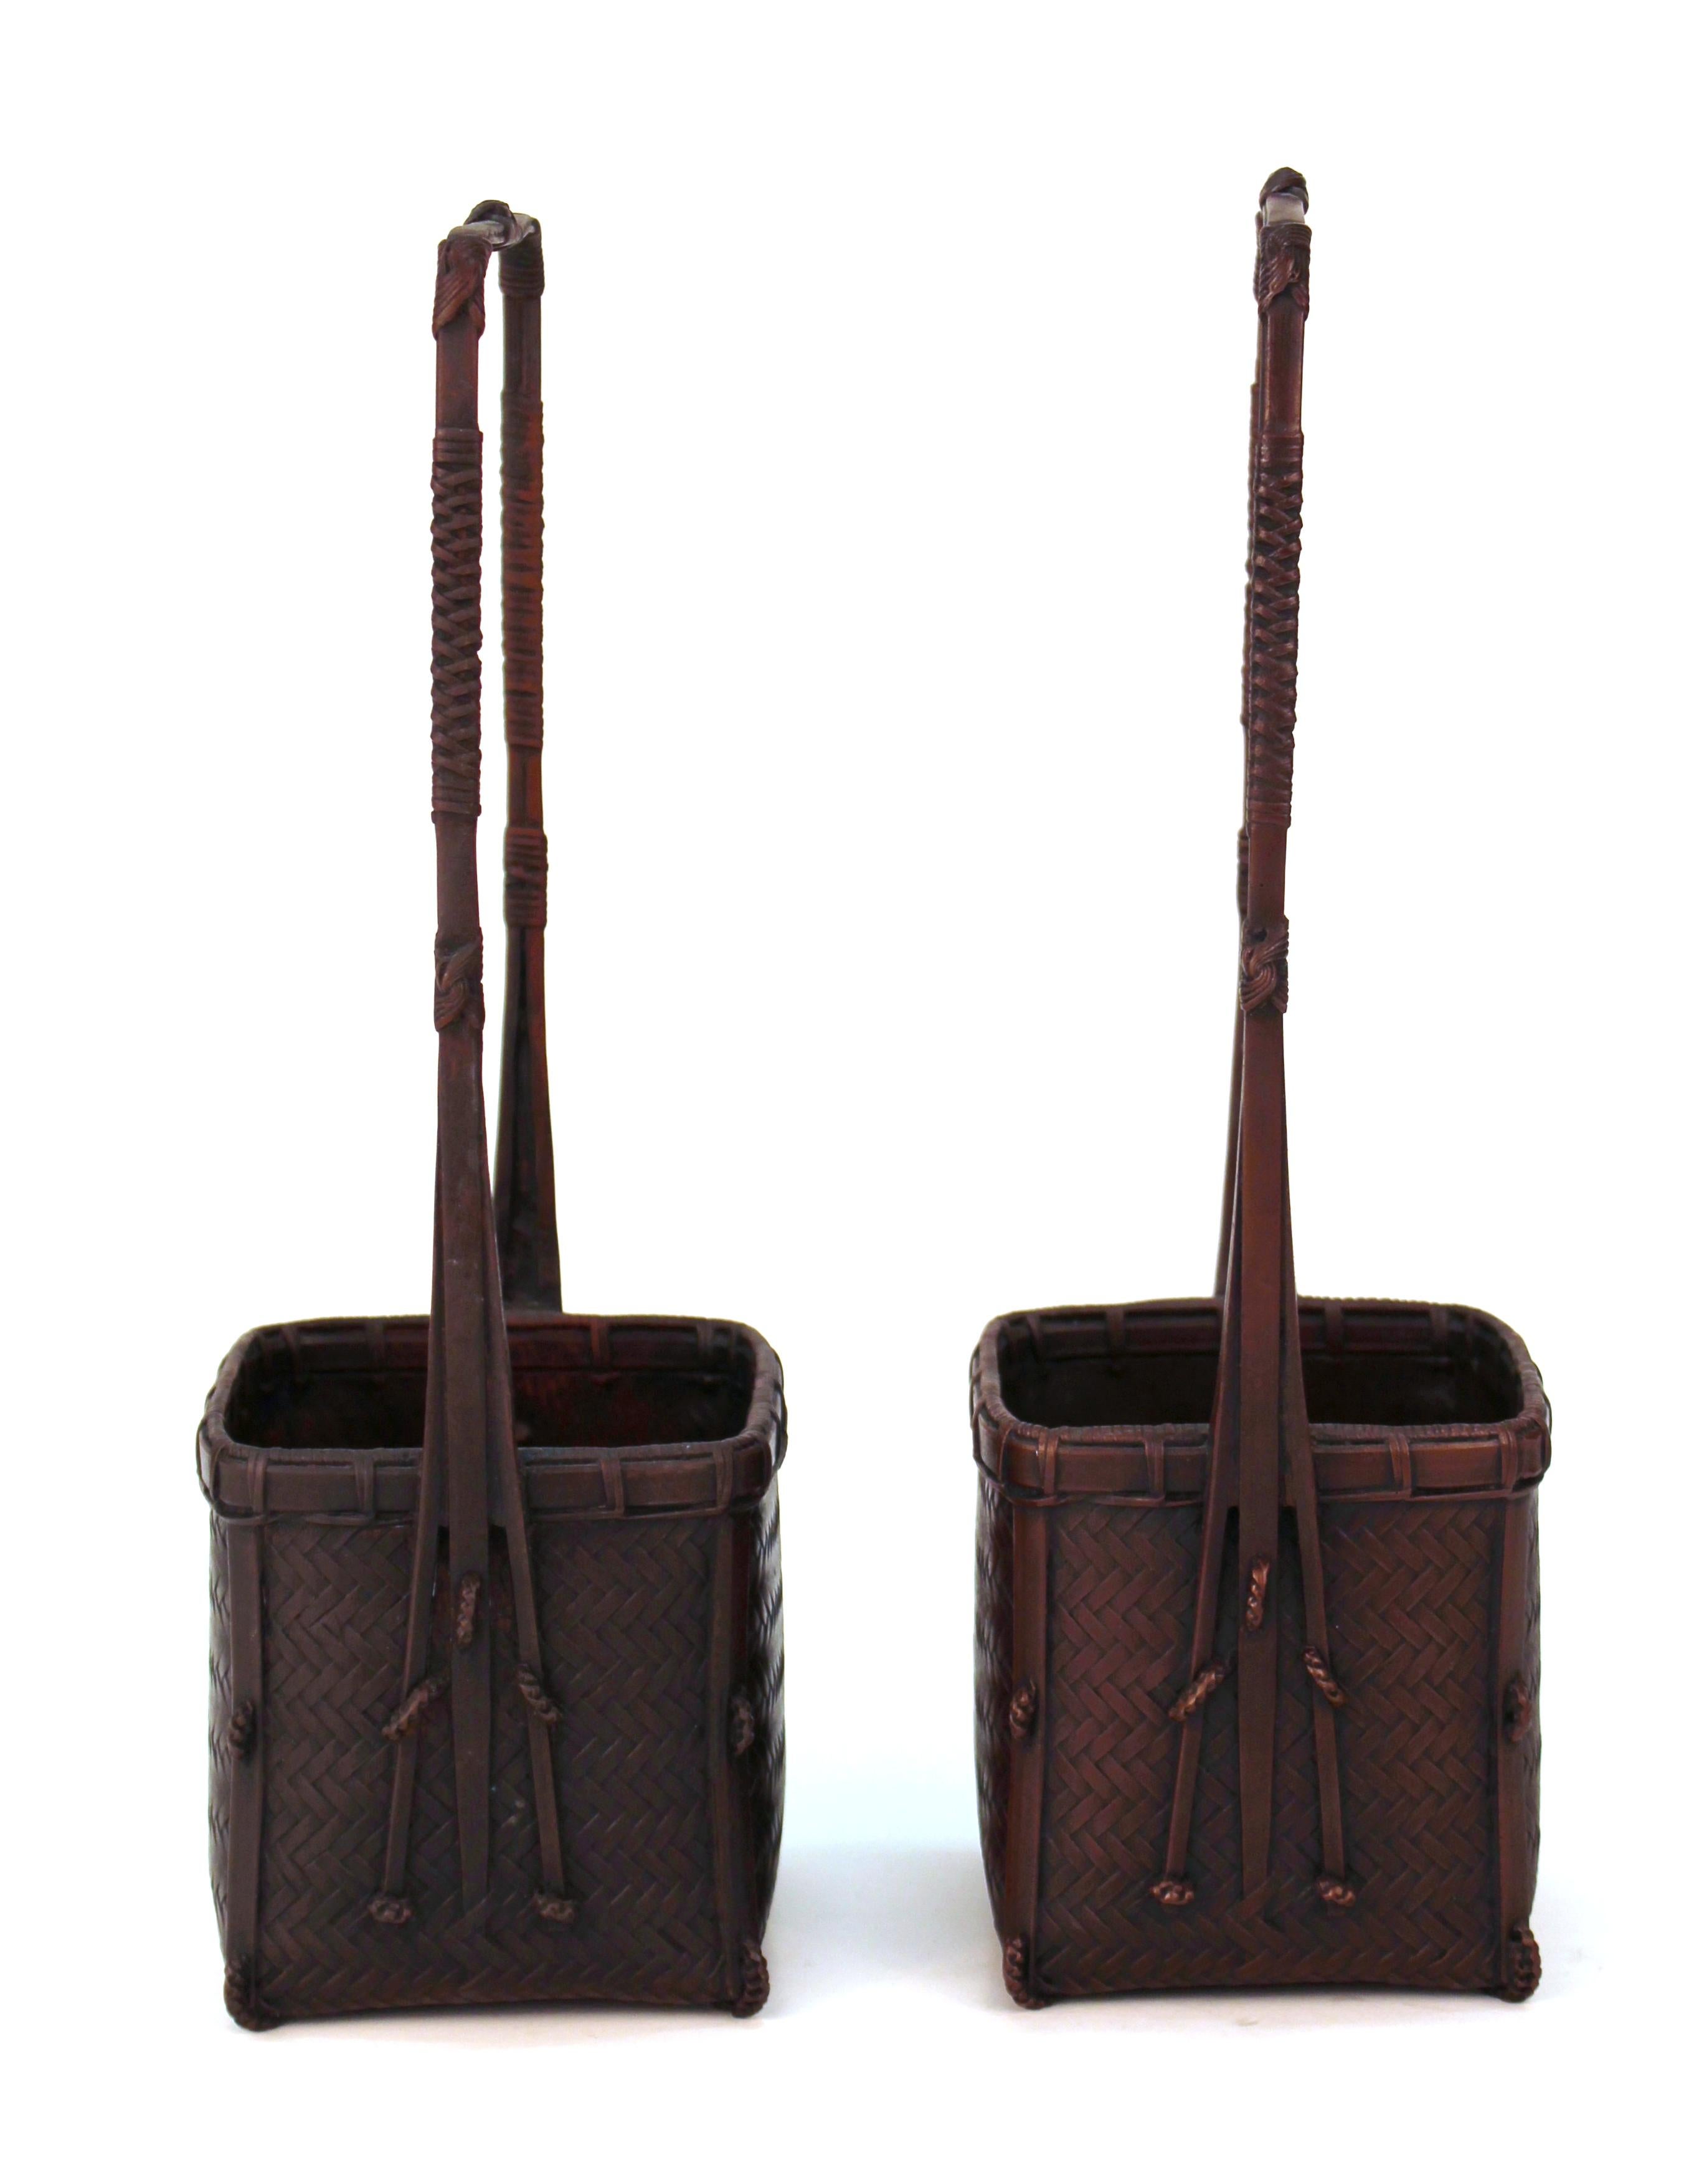 Taisho period Japanese pair of ikebana baskets in bronze, with square baskets and tall squared handles. The pair was made in Japan in the 1910s-1920s and has makers marks on the bottom. In great vintage condition with age appropriate patina.